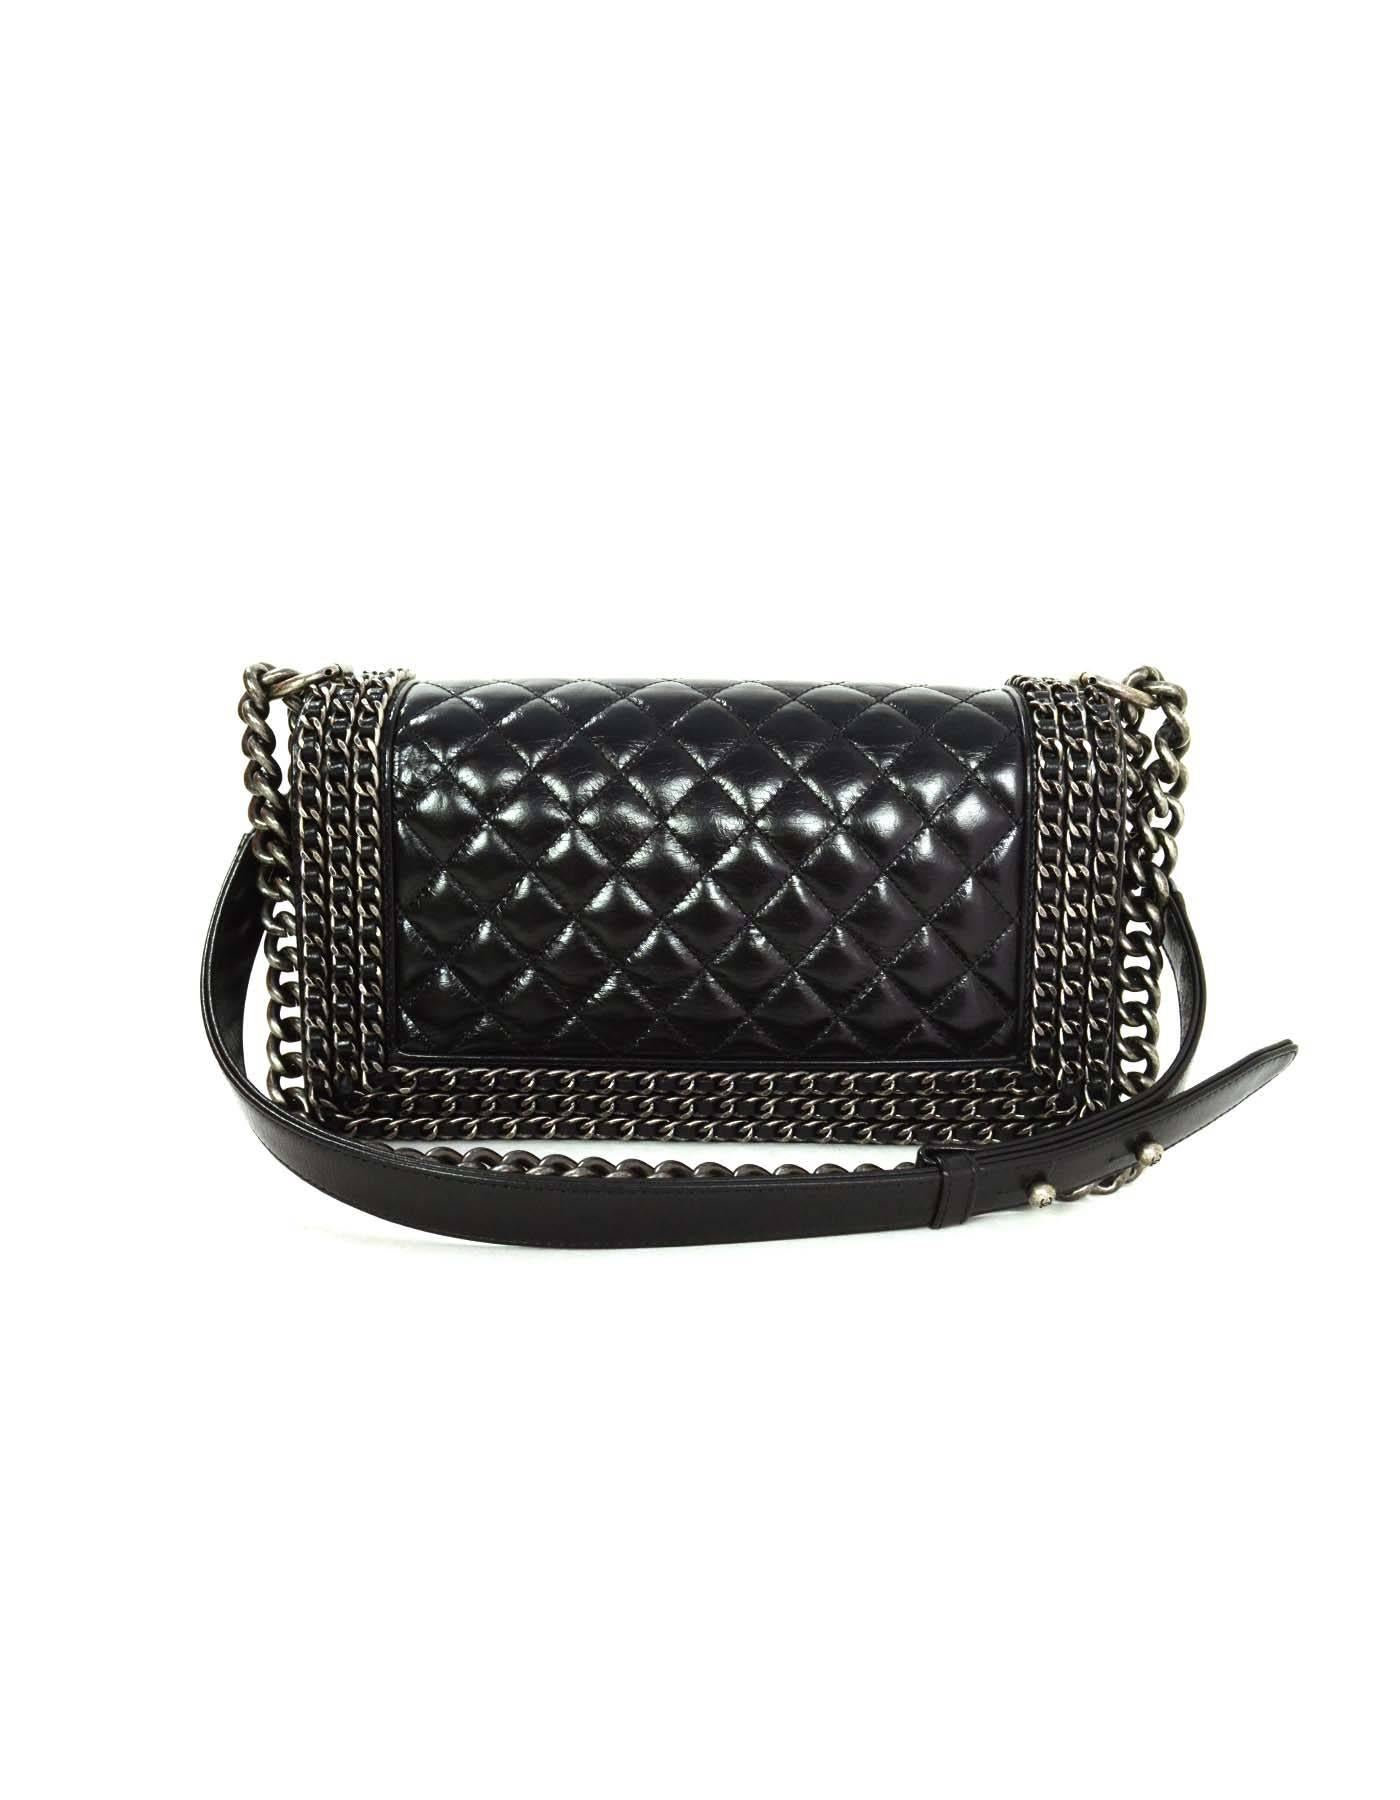 Chanel '15 Black Distressed Chain Around Medium Boy Bag 
Features triple black leather woven chain framing flap top
Made In: Italy
Year of Production: 2015
Color: Black
Hardware: Oxidized silvertone
Materials: Leather and metal
Lining: